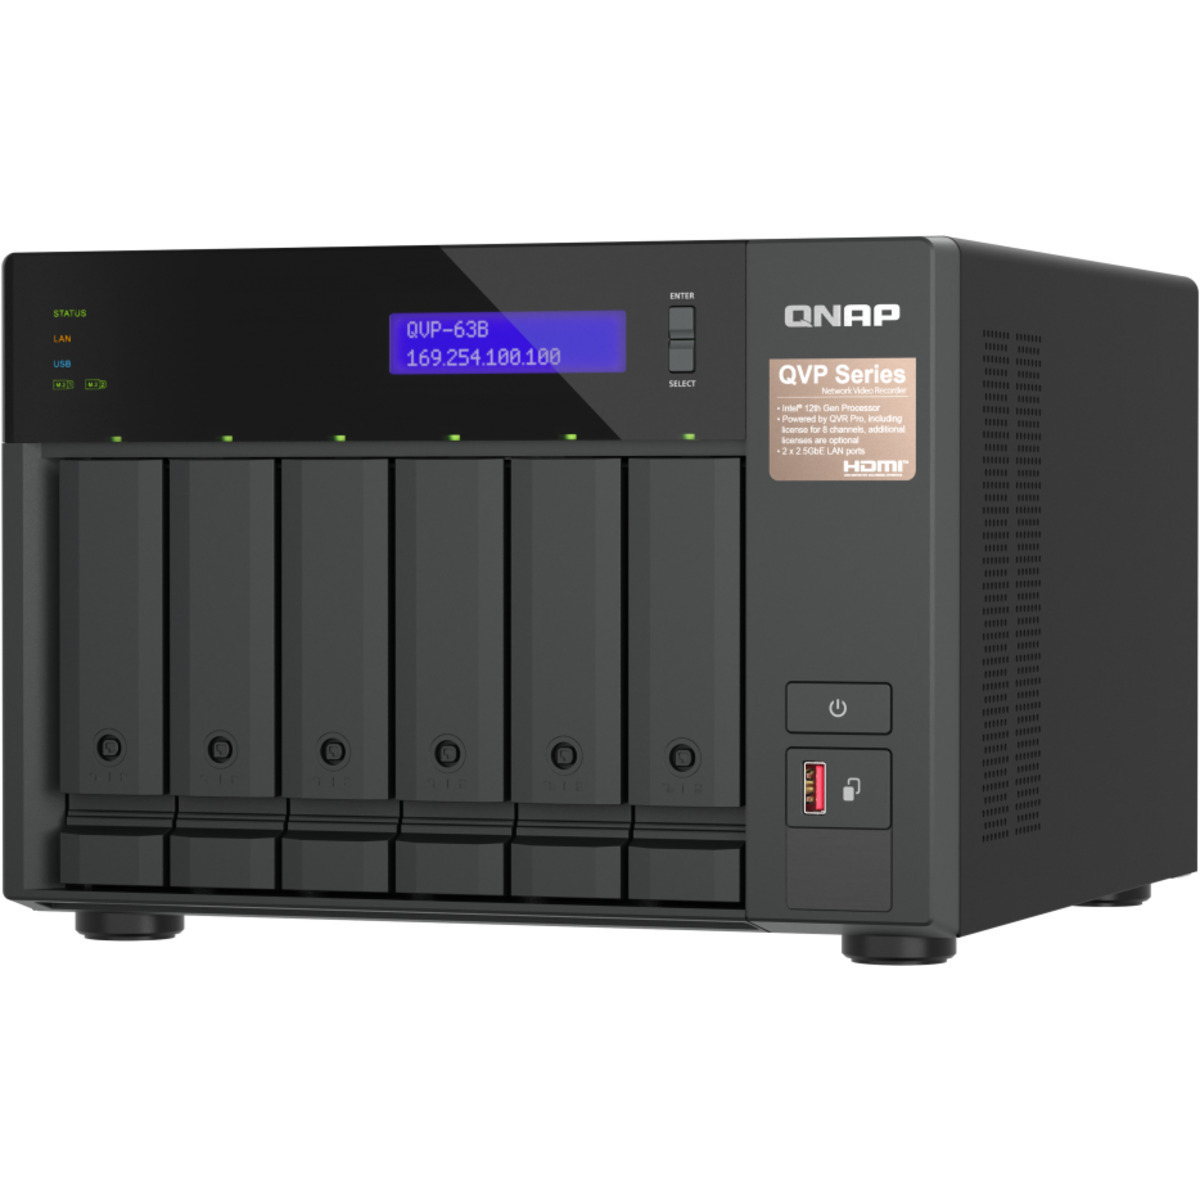 buy QNAP QVP-63B 132tb Desktop NVR - Network Video Recorder 6x22000gb Seagate IronWolf Pro ST22000NT001 3.5 7200rpm SATA 6Gb/s HDD NAS Class Drives Installed - Burn-In Tested - nas headquarters buy network attached storage server device das new raid-5 free shipping usa spring sale QVP-63B